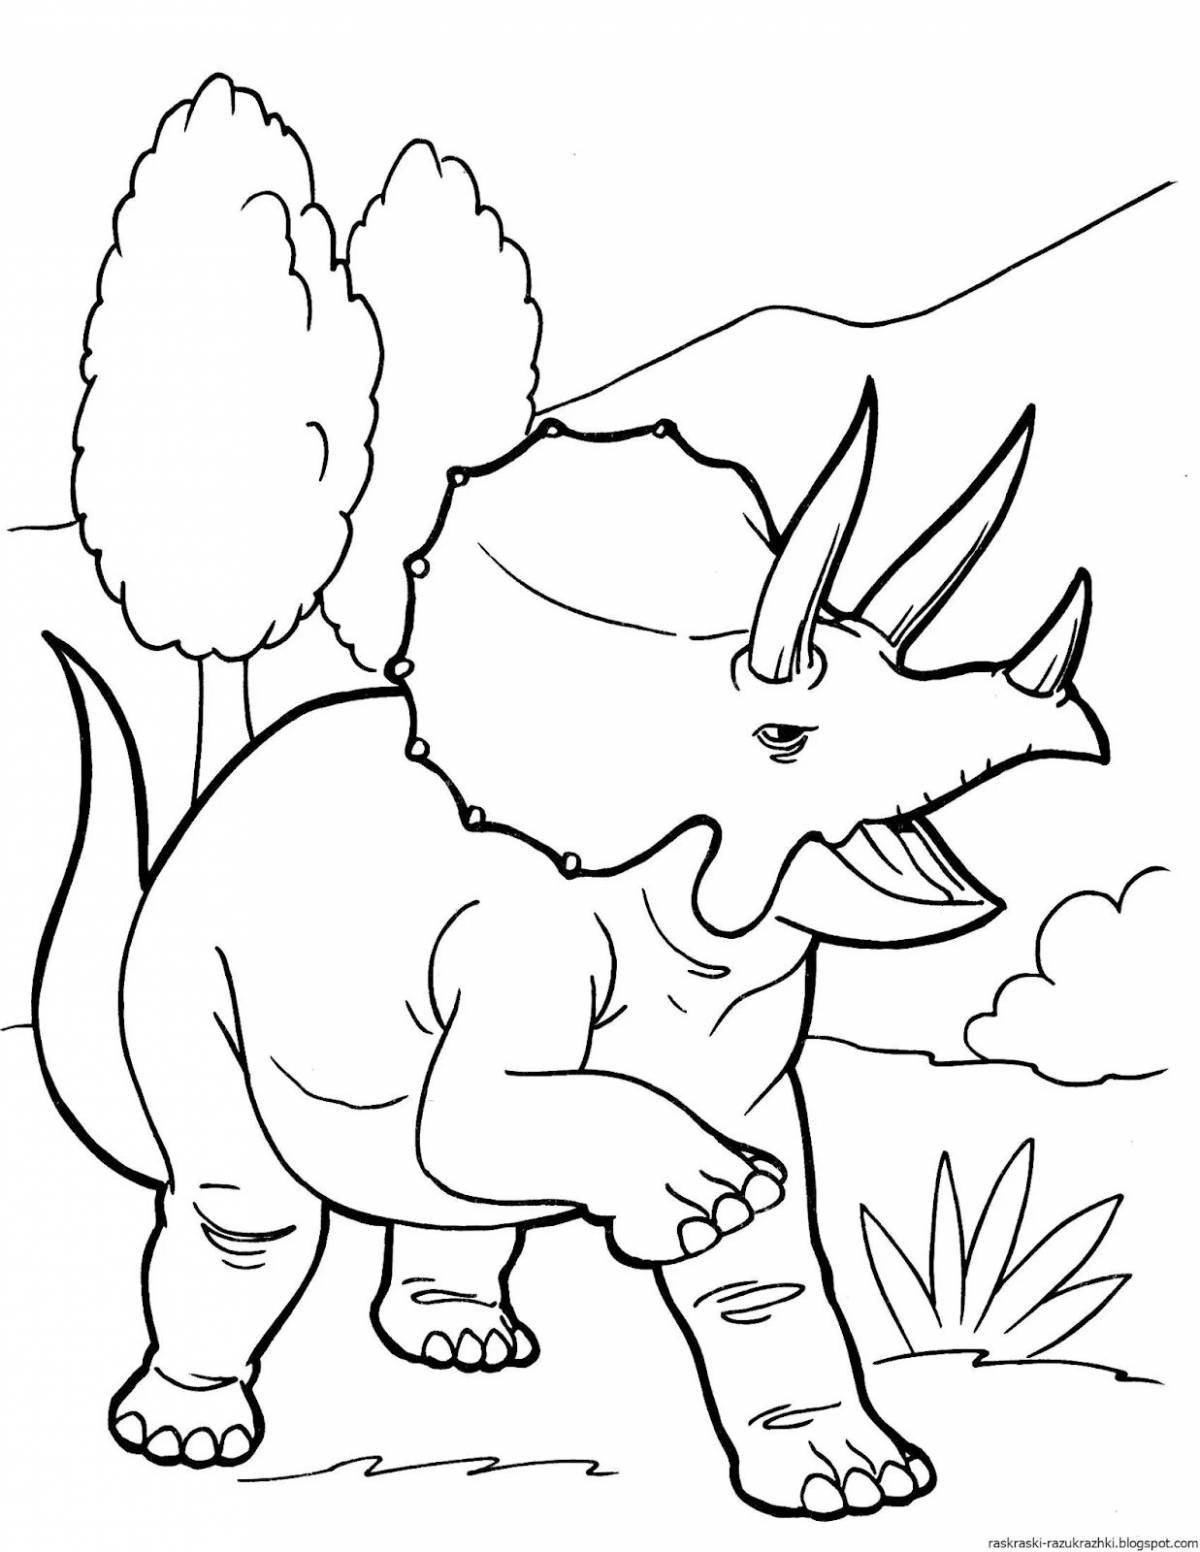 Fine dinosaur coloring pages for kids